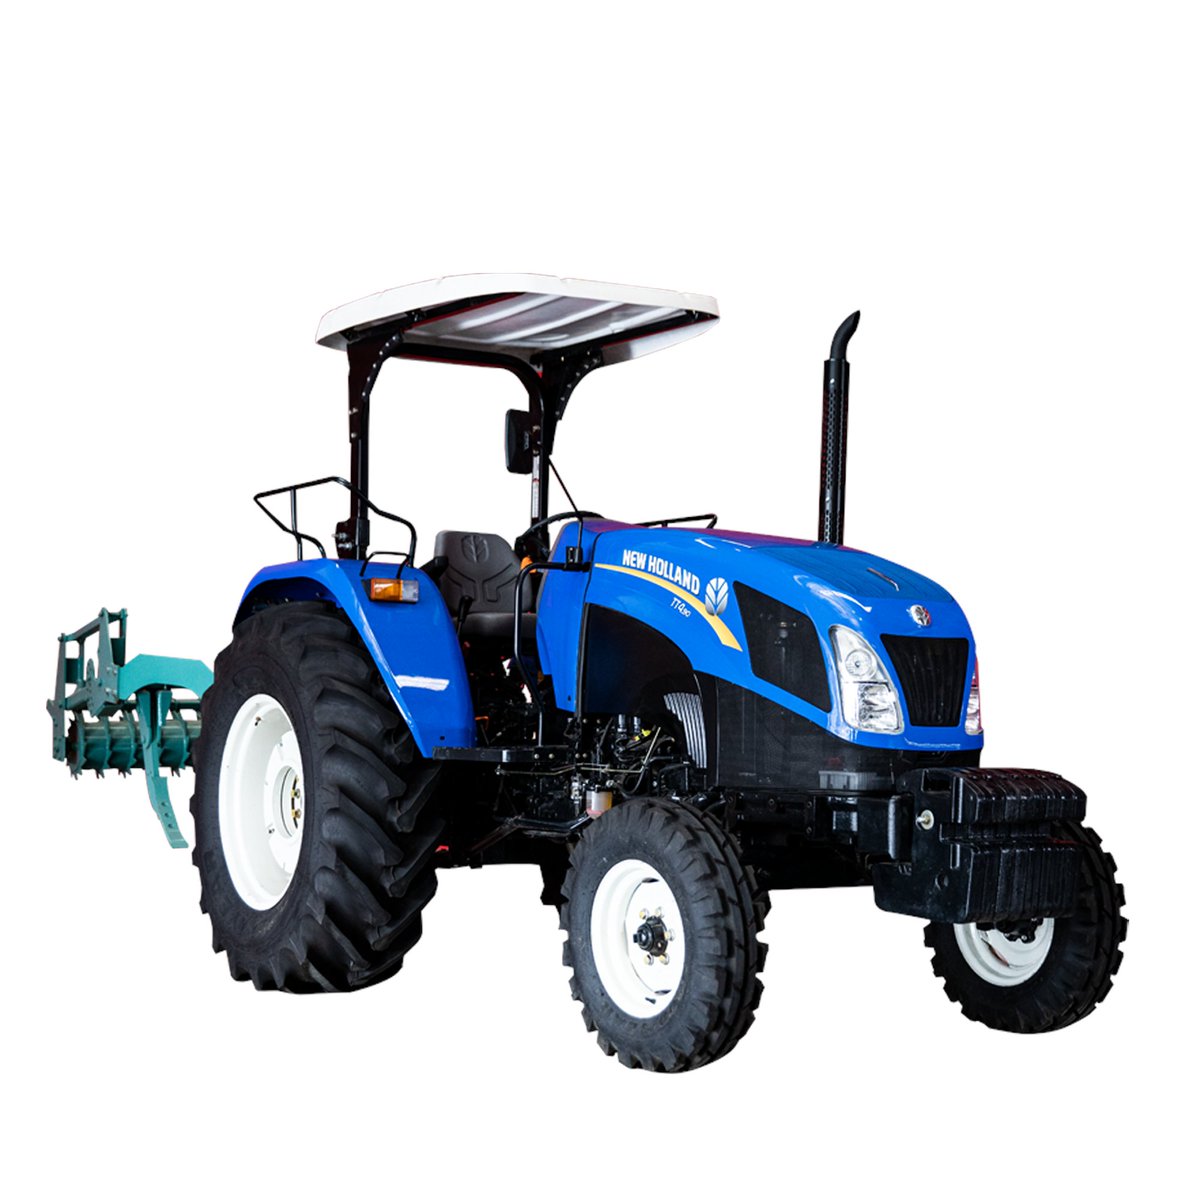 Do you have a question about the New Holland TT4.90 tractor that you would want to be answered?
 
 Ask us in the comments section and we will answer you.

#CMCMotors #NewHolland #AgricultureKenya